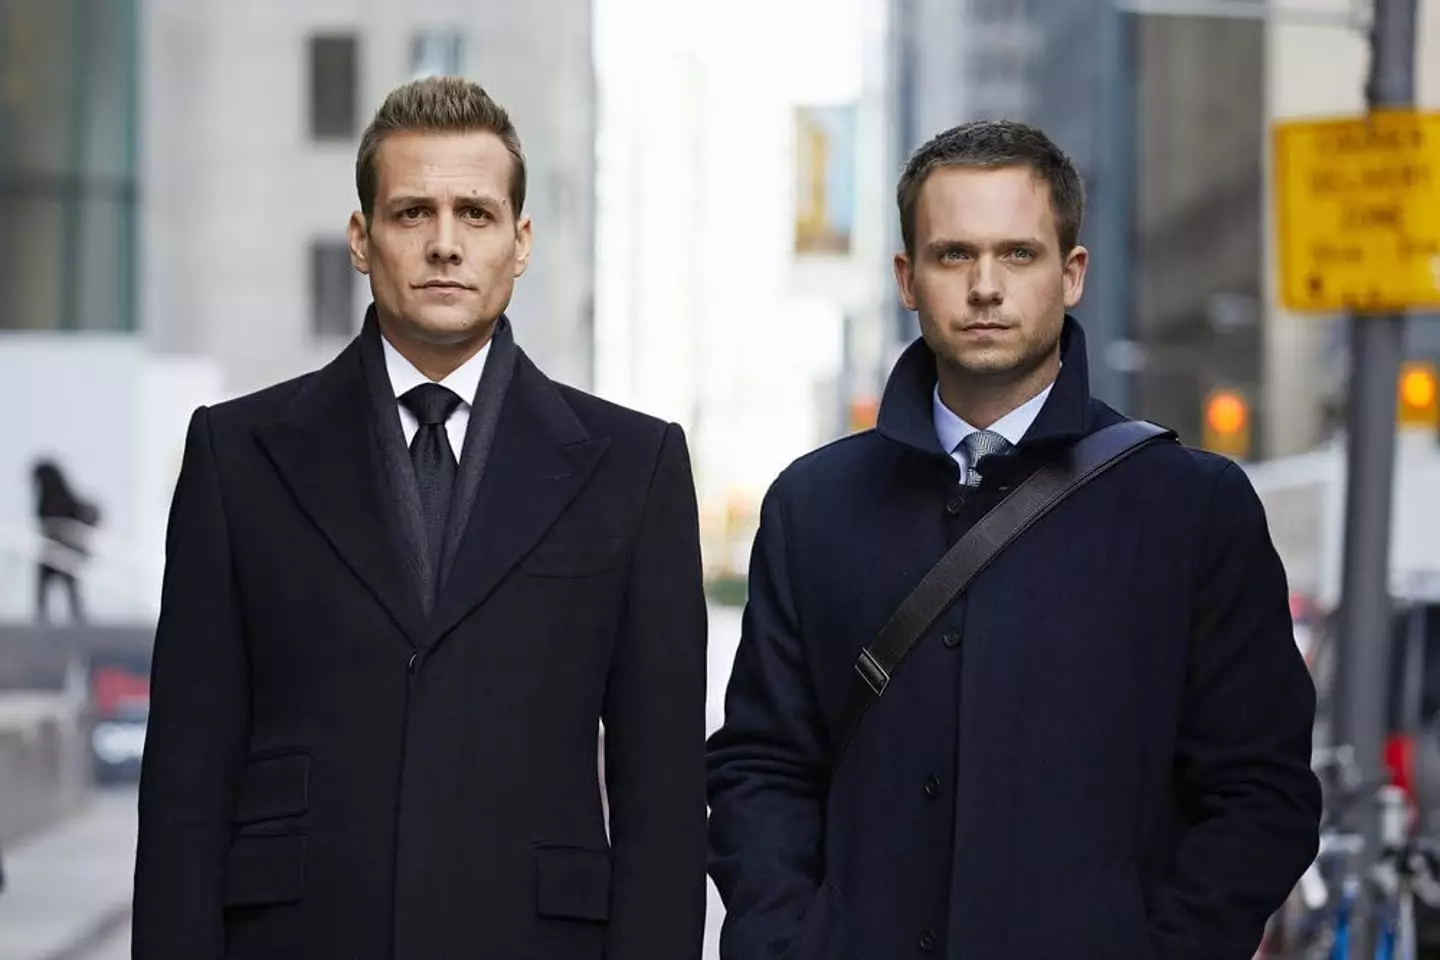 Gabriel Macht (left) & Patrick J. Adams (right) playing Harvey Specter and Mike Ross in Suits.